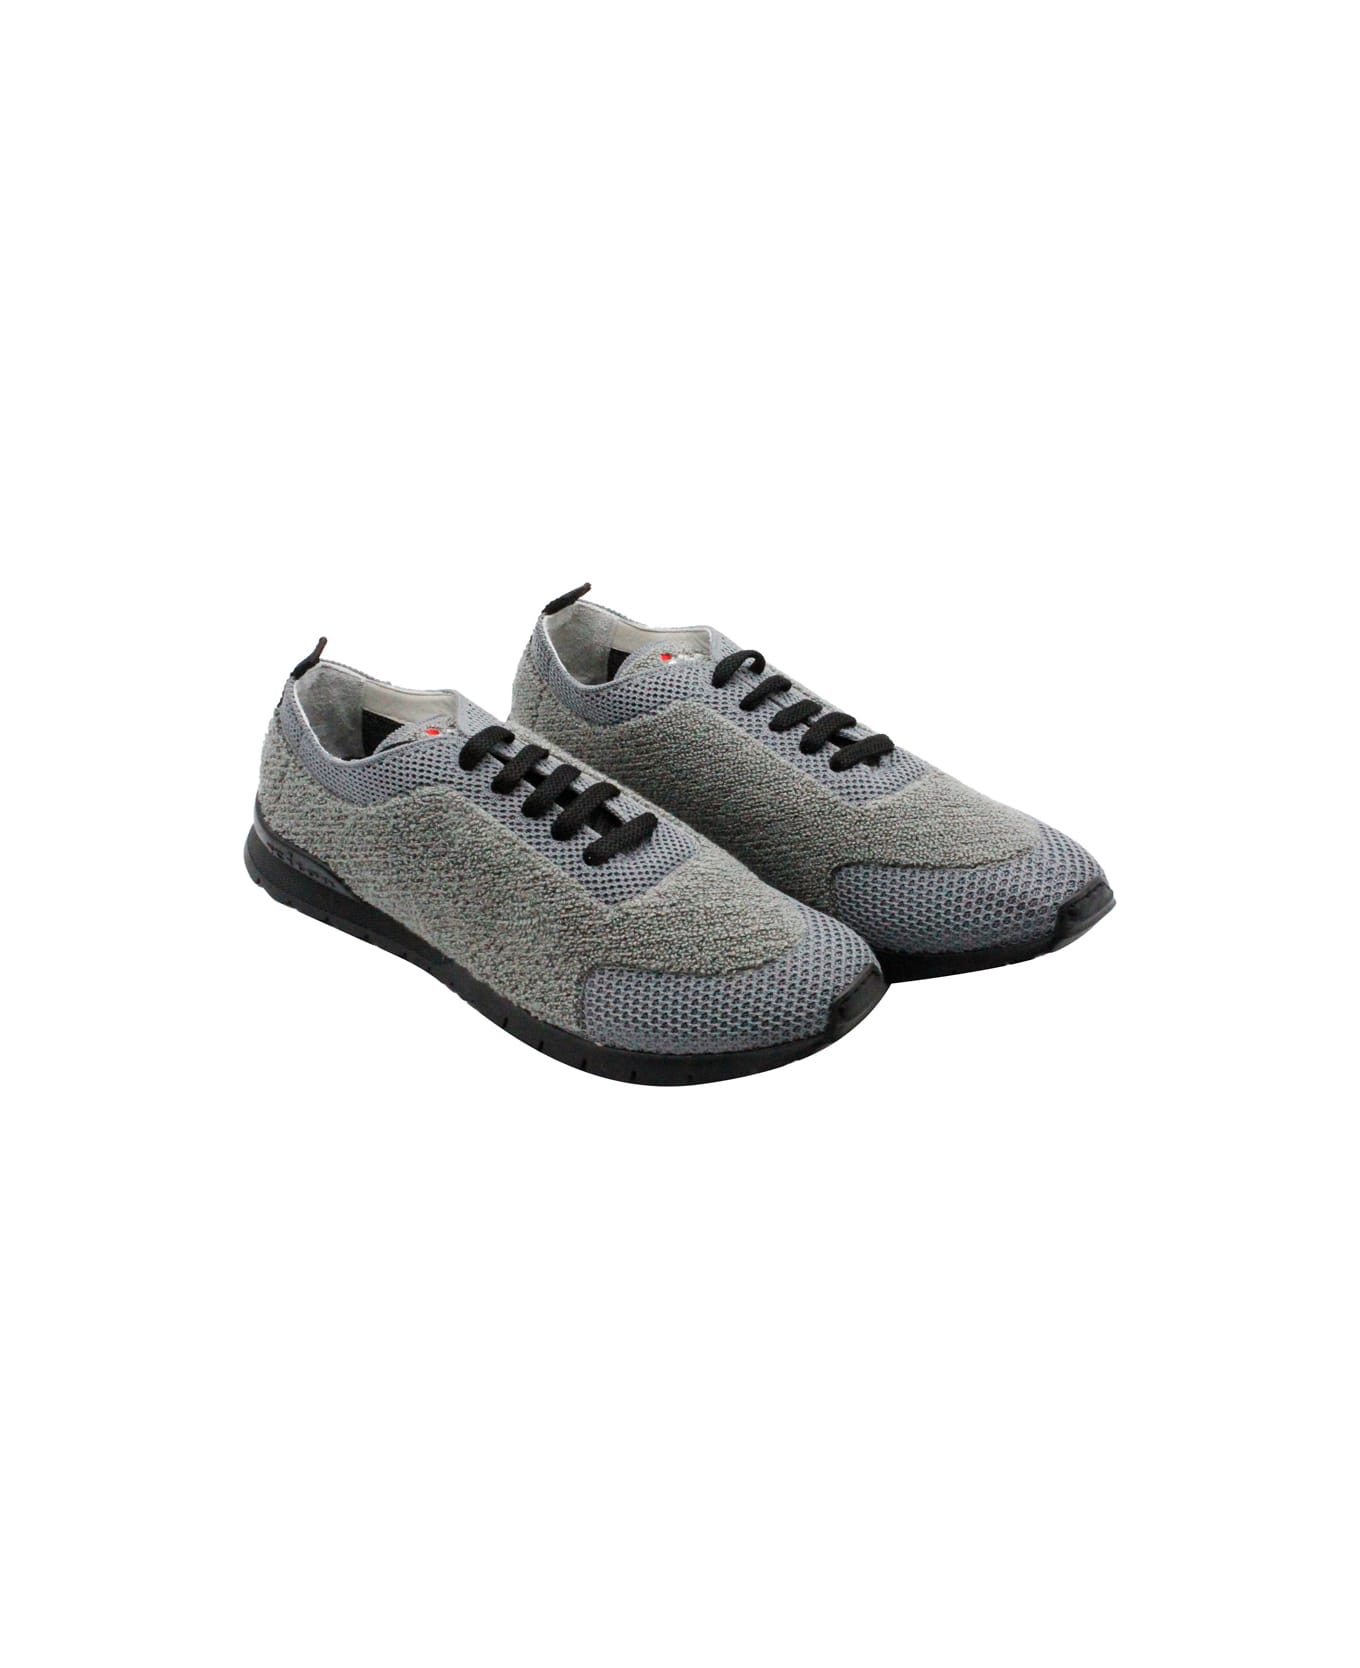 Kiton Sneaker Shoe Made Of Knit Fabric. The Bottom, With A Black Sole, Is Flexible And Extra Light; The Elastic Tongue Ensures Greater Comfort. Logo - Grey スニーカー